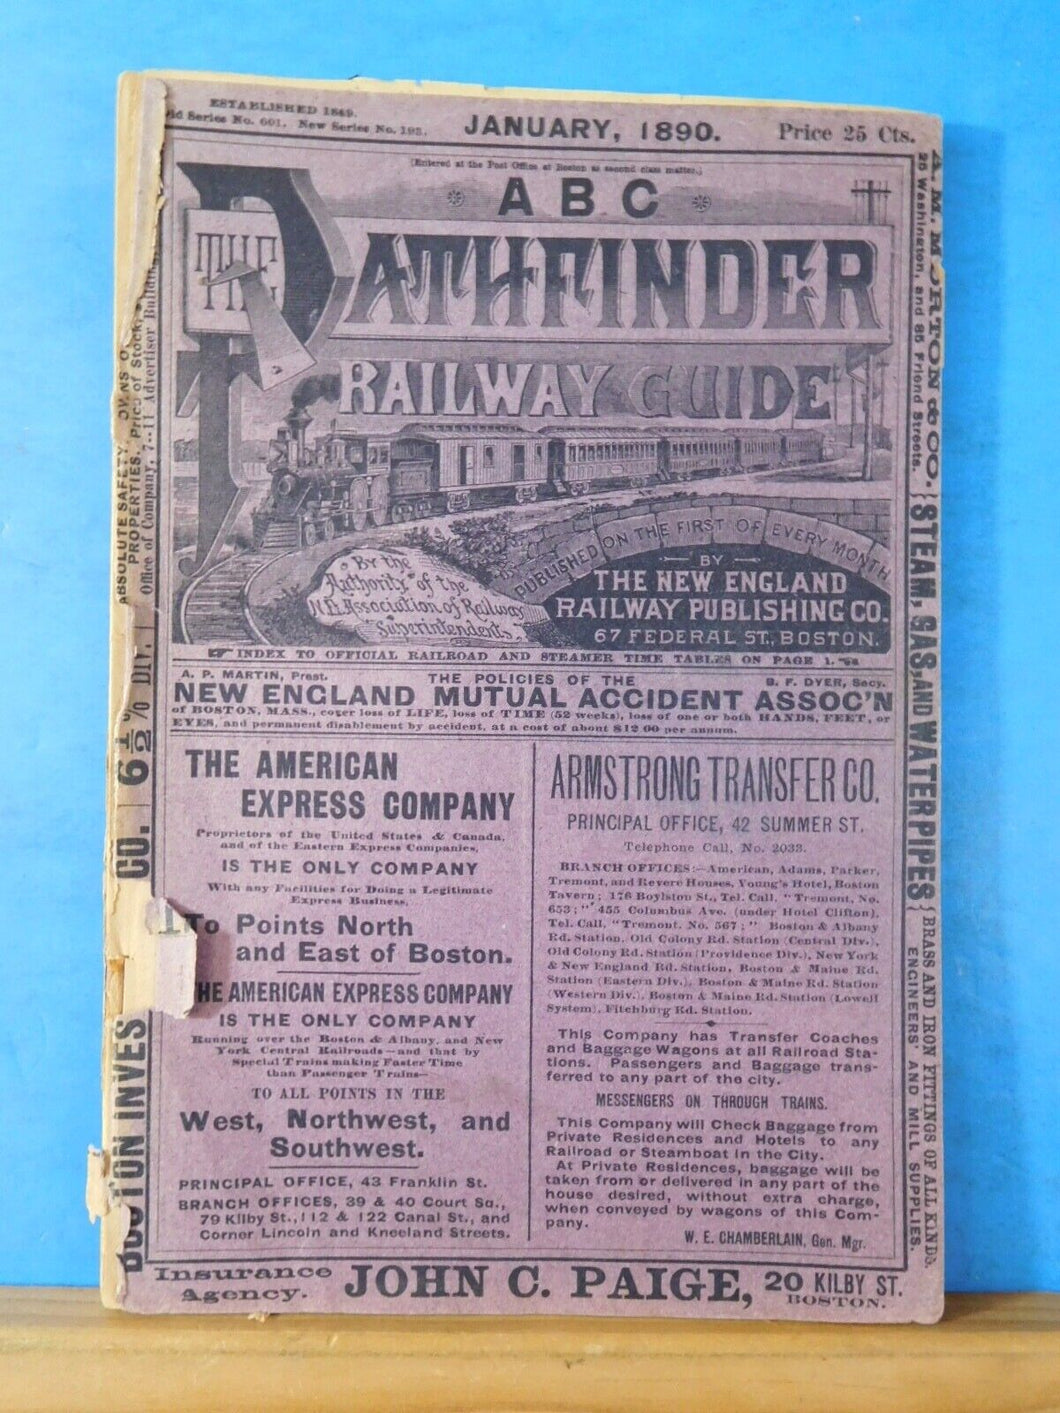 ABC The Pathfinder Railway Guide 1890 January New England Official Guide